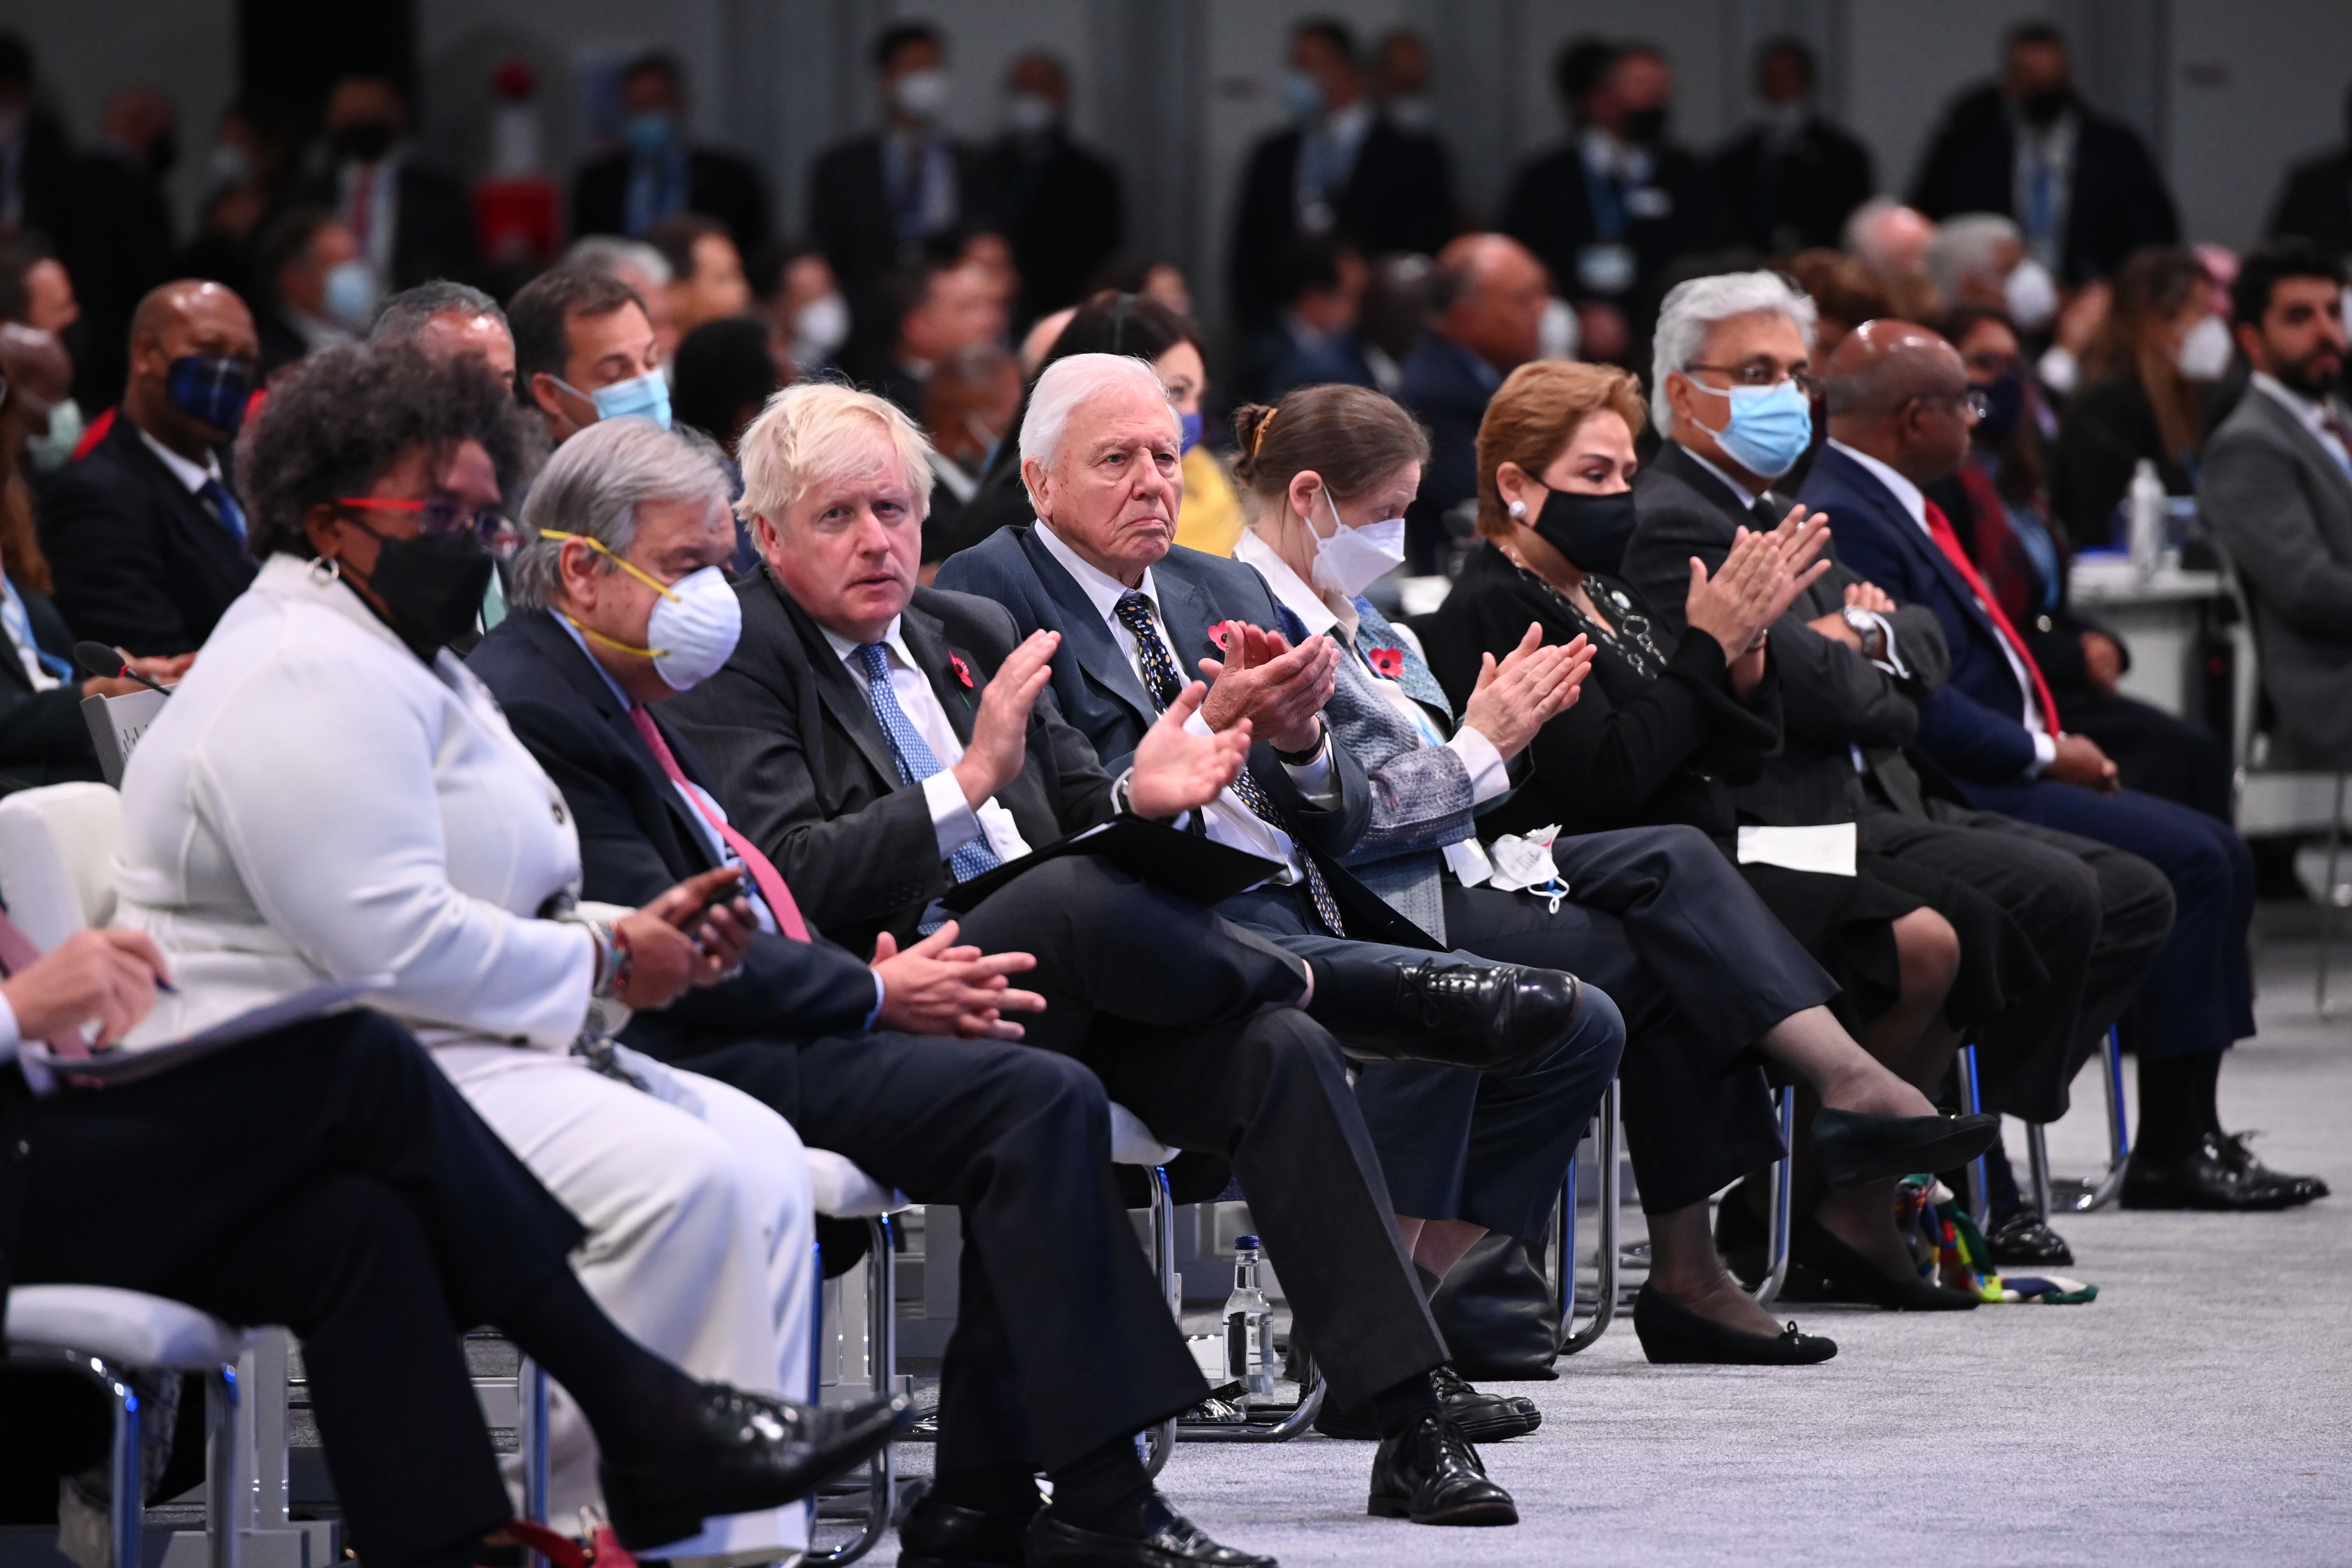 Secretary-General of the United Nations António Guterres, second from left, British Prime Minister Boris Johnson, third from left, and Sir David Attenborough, fourth from left, are seated in the front row during the opening ceremony of the conference Monday. 